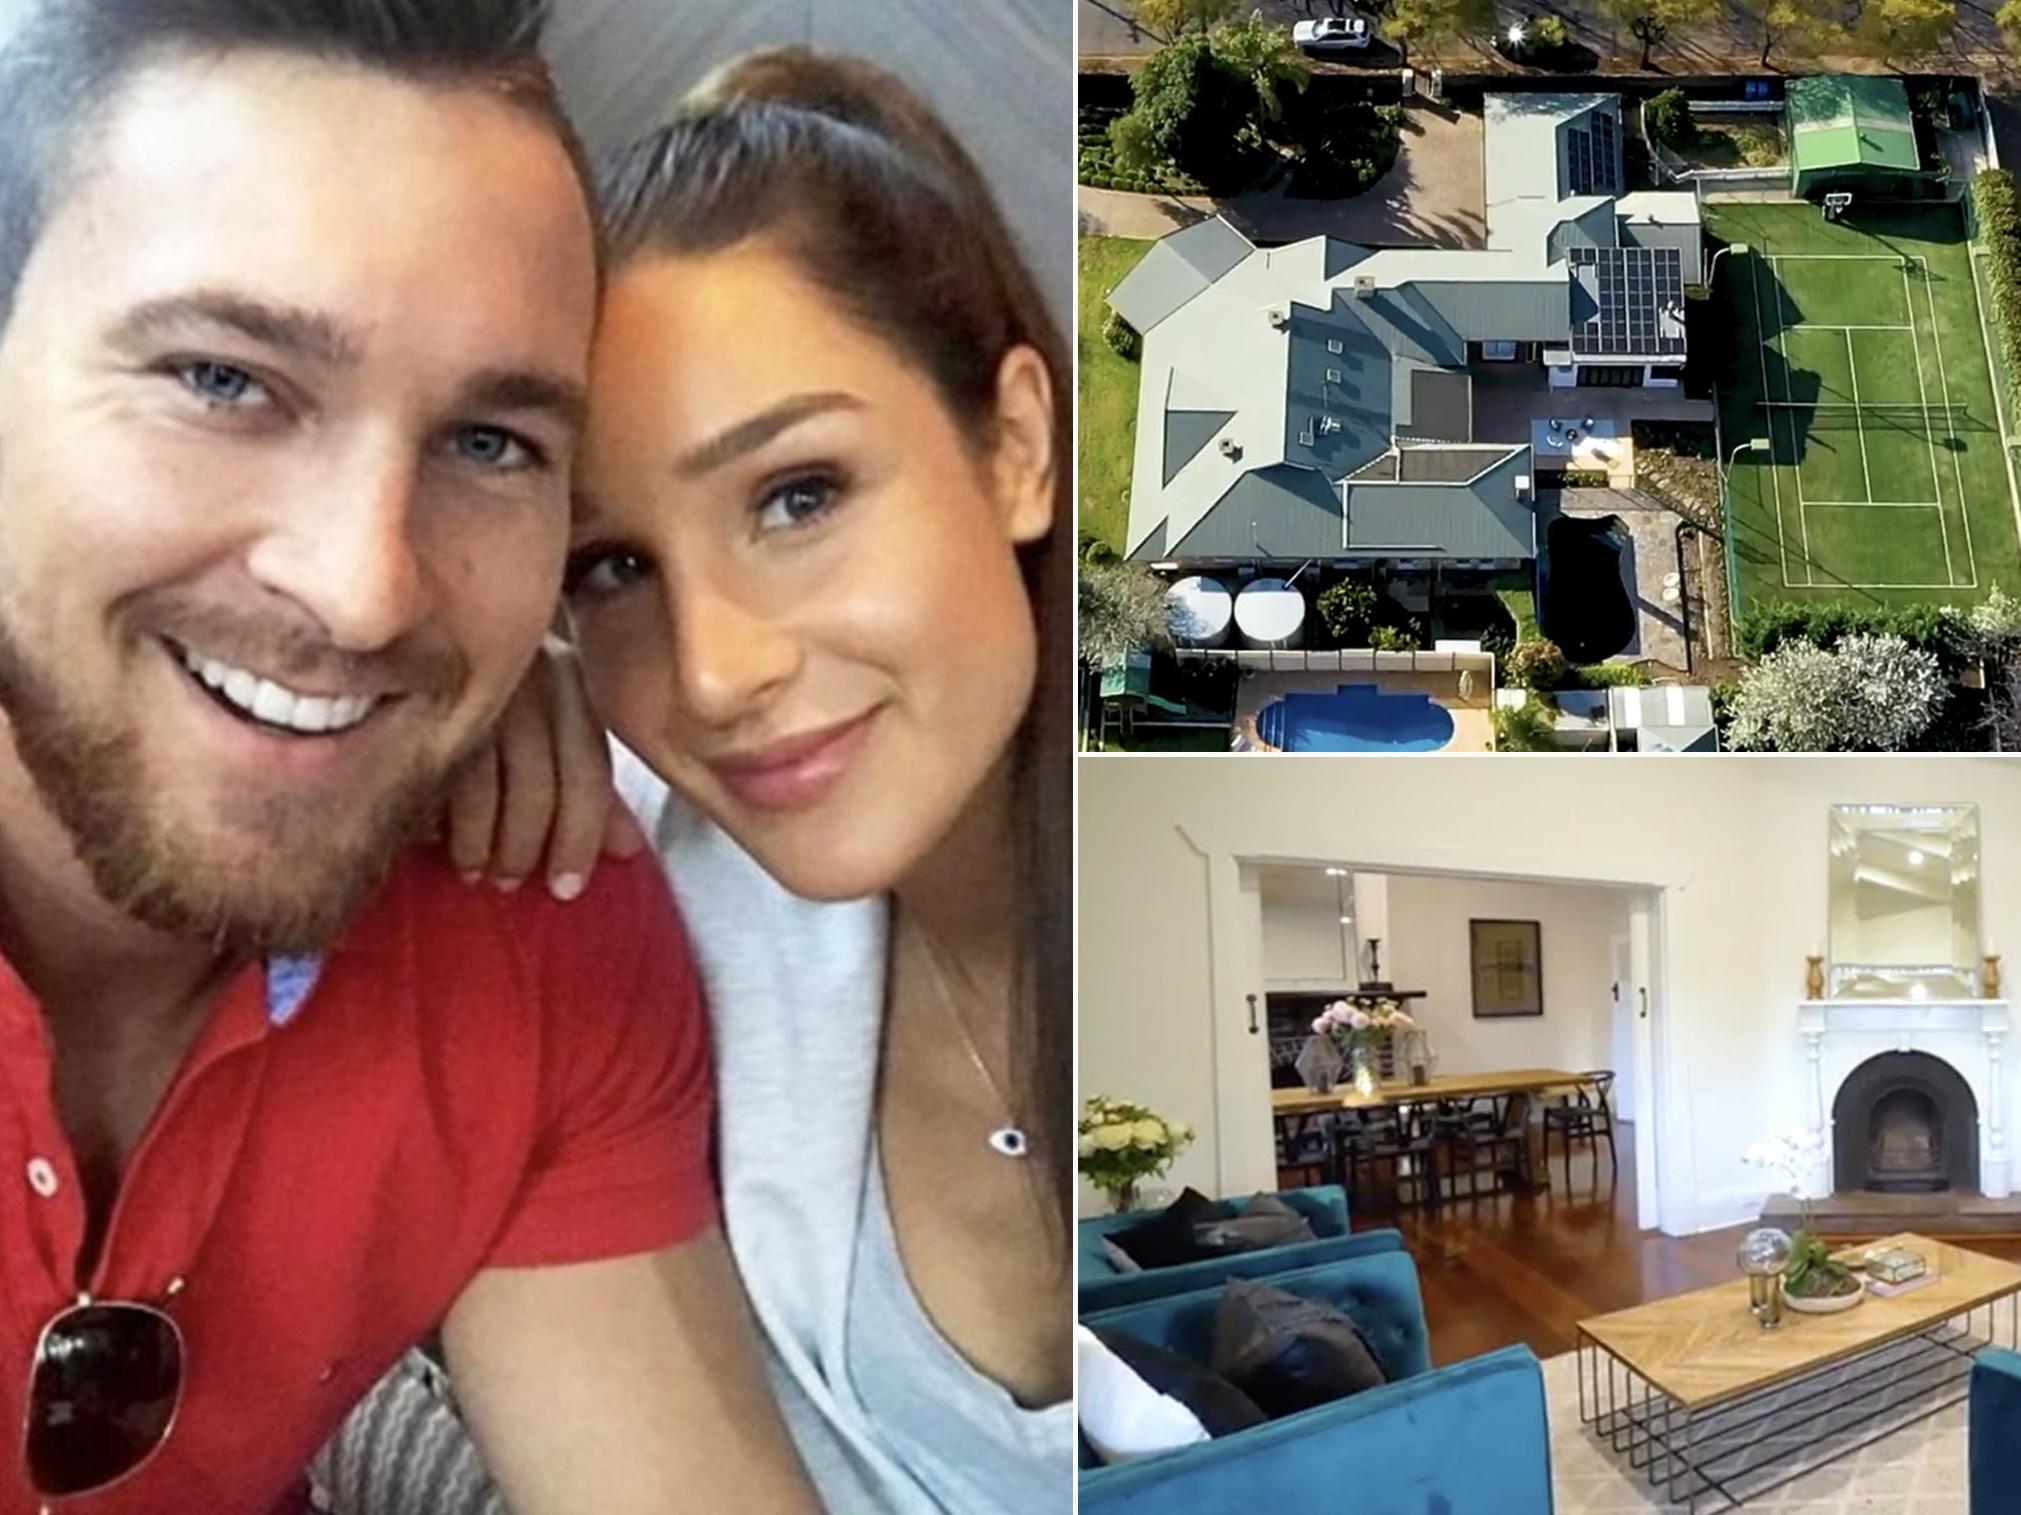 Kayla Love Having Sex - Australian fitness star Kayla Itsines selling sprawling home she shared  with ex Tobi Pearce | The Independent | The Independent